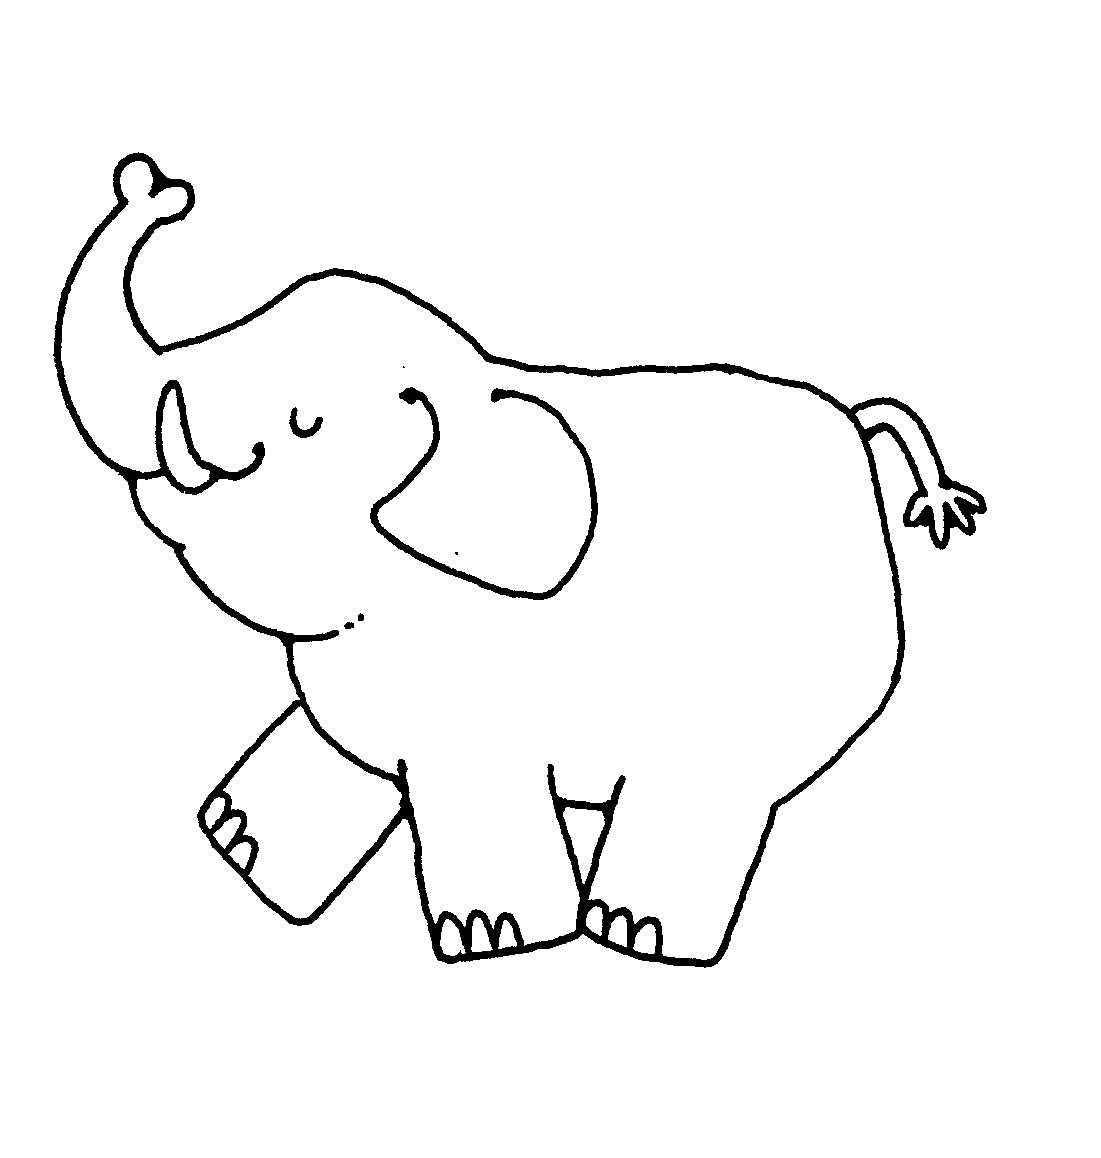 Images For Black And White El - Elephant Clipart Black And White